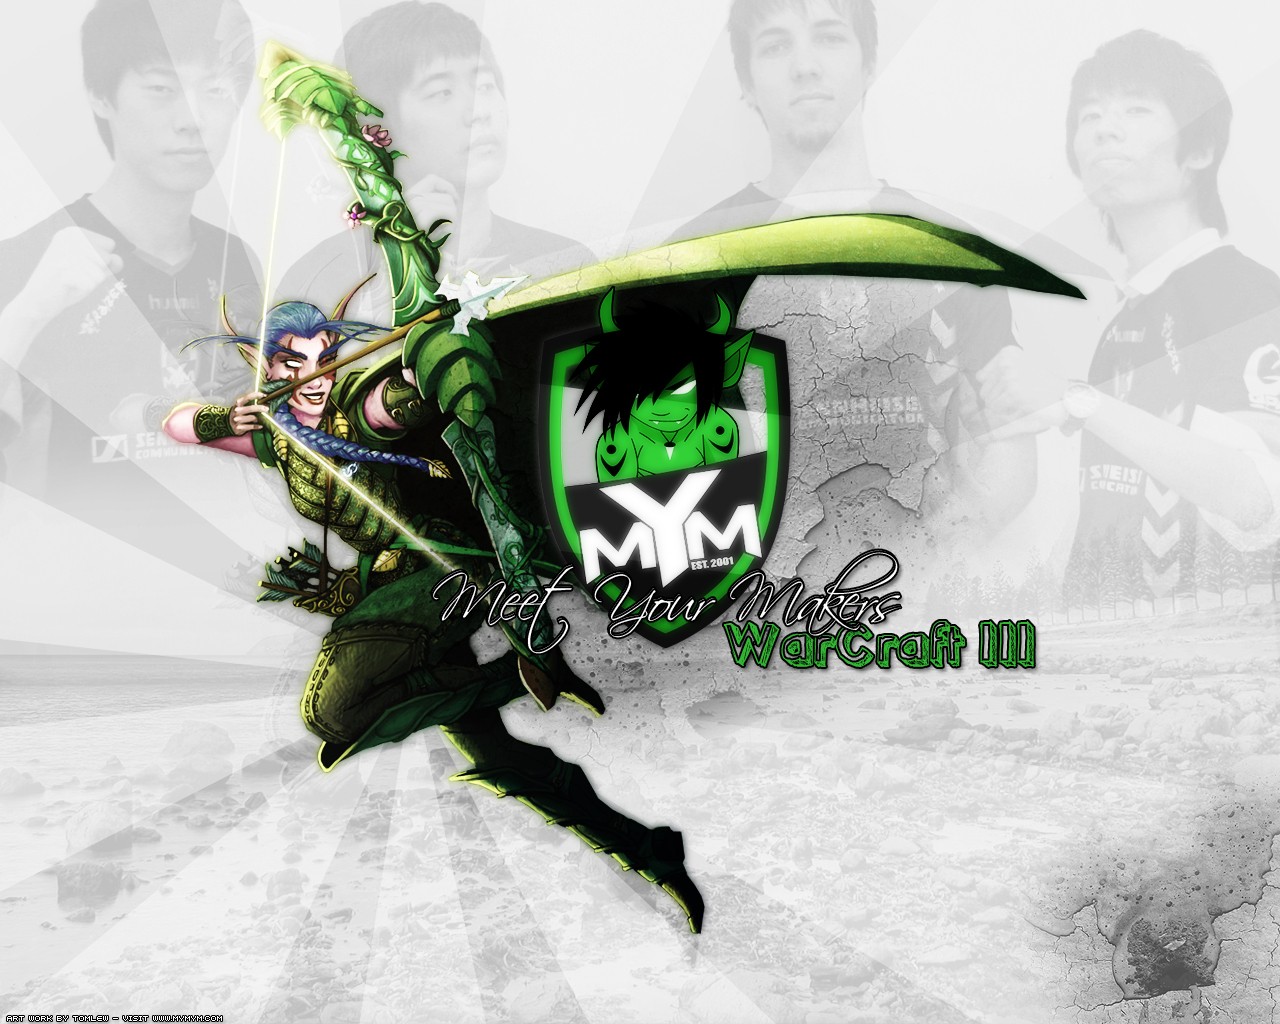 General 1280x1024 Meet Your Makers Warcraft III PC gaming logo bow and arrow